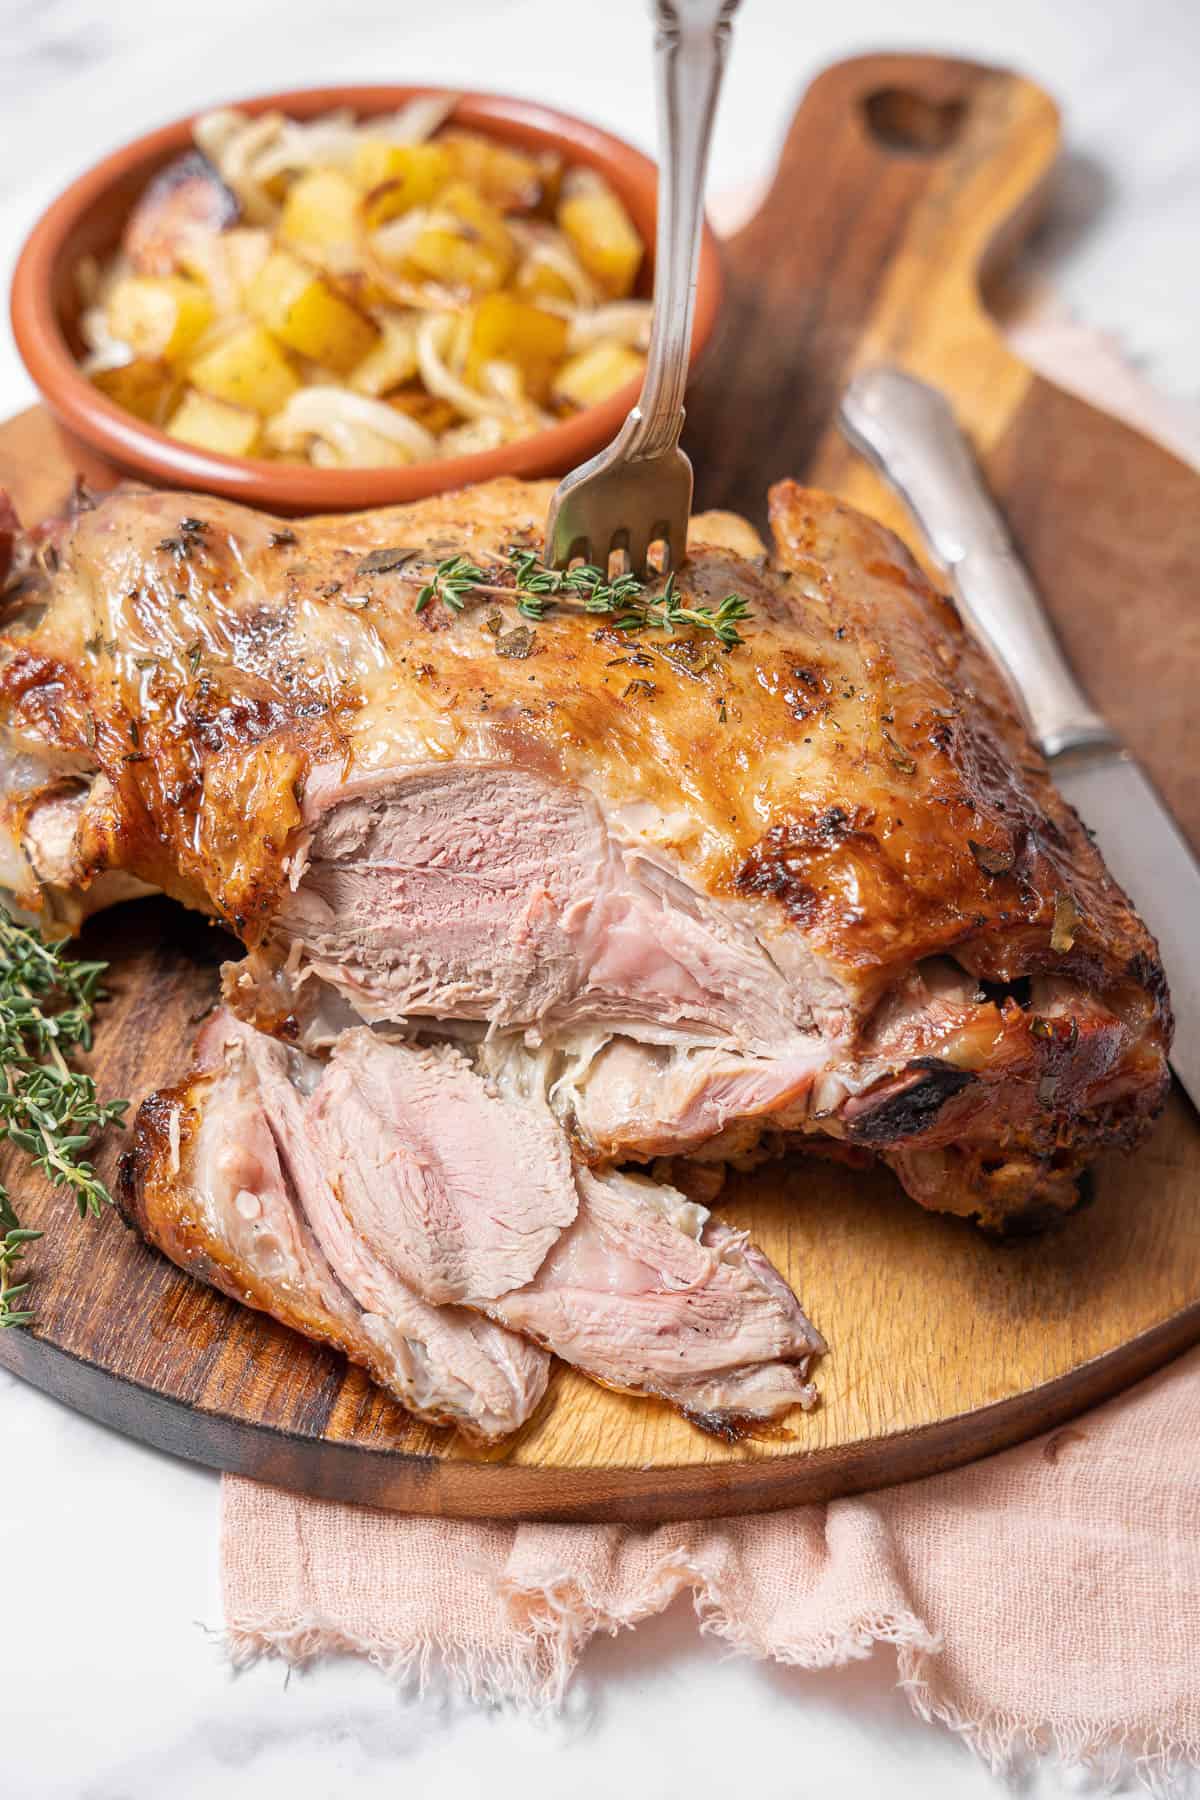 sliced roasted lamb on a wooden cutting board.